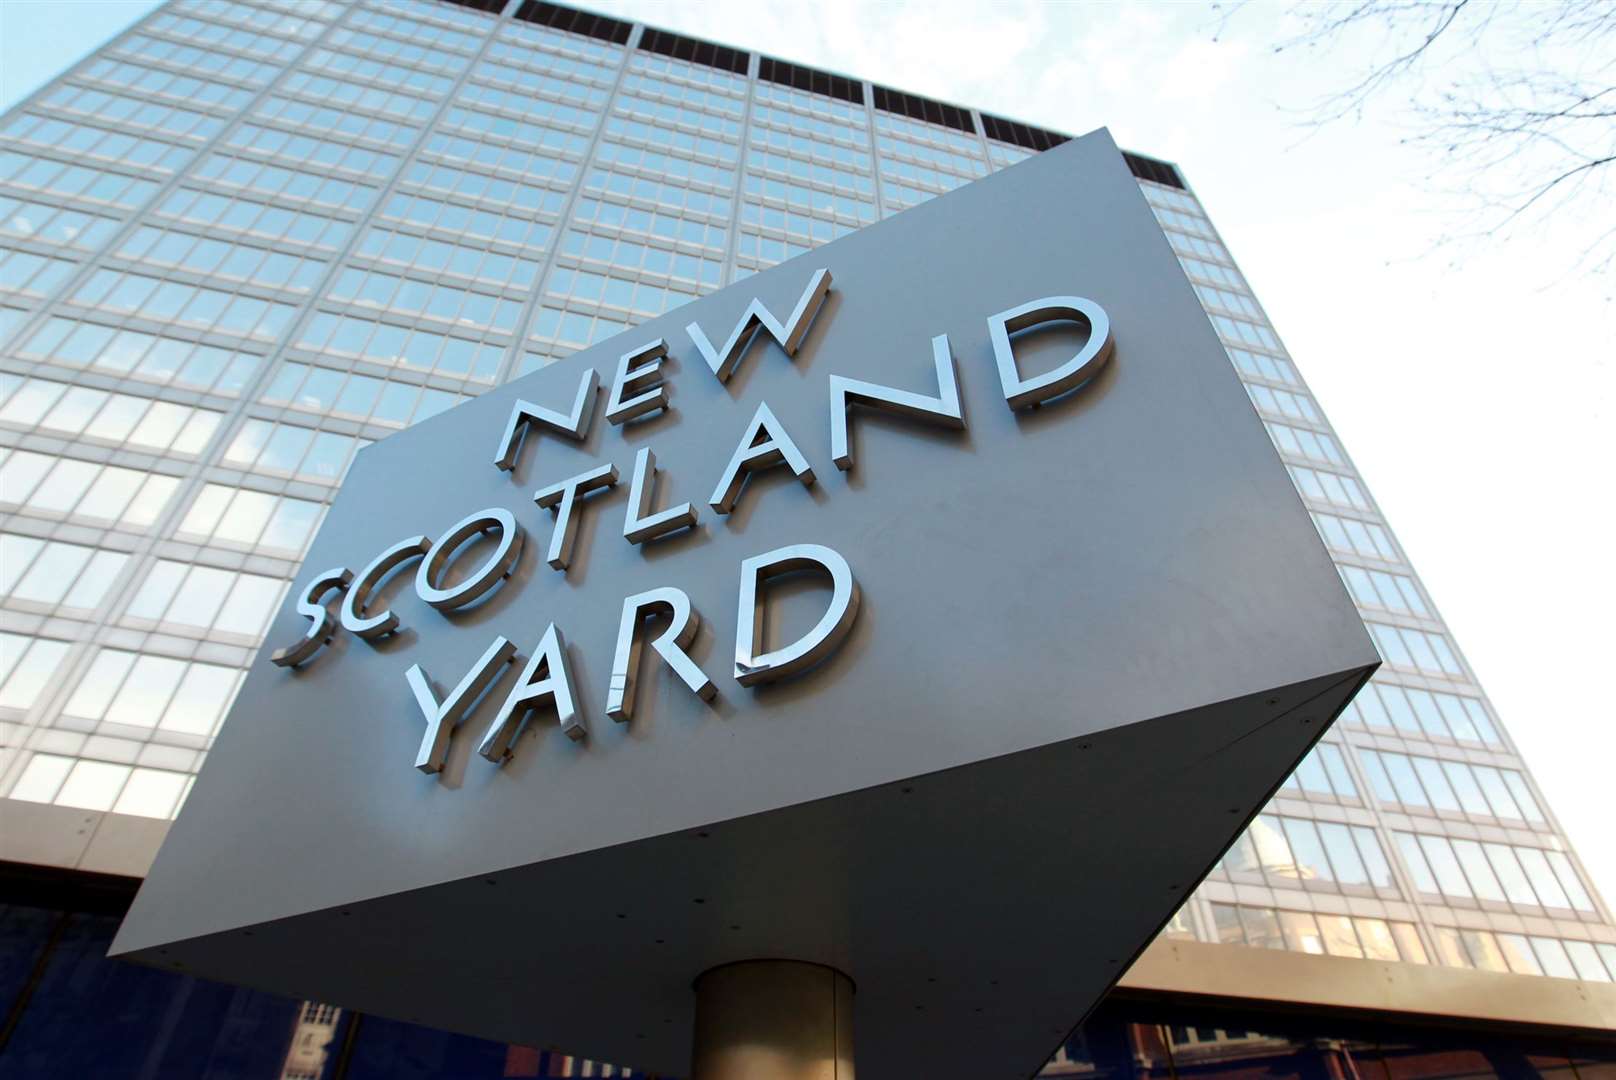 Scotland Yard says it is committed to tackling hate crime (Sean Dempsey/PA)